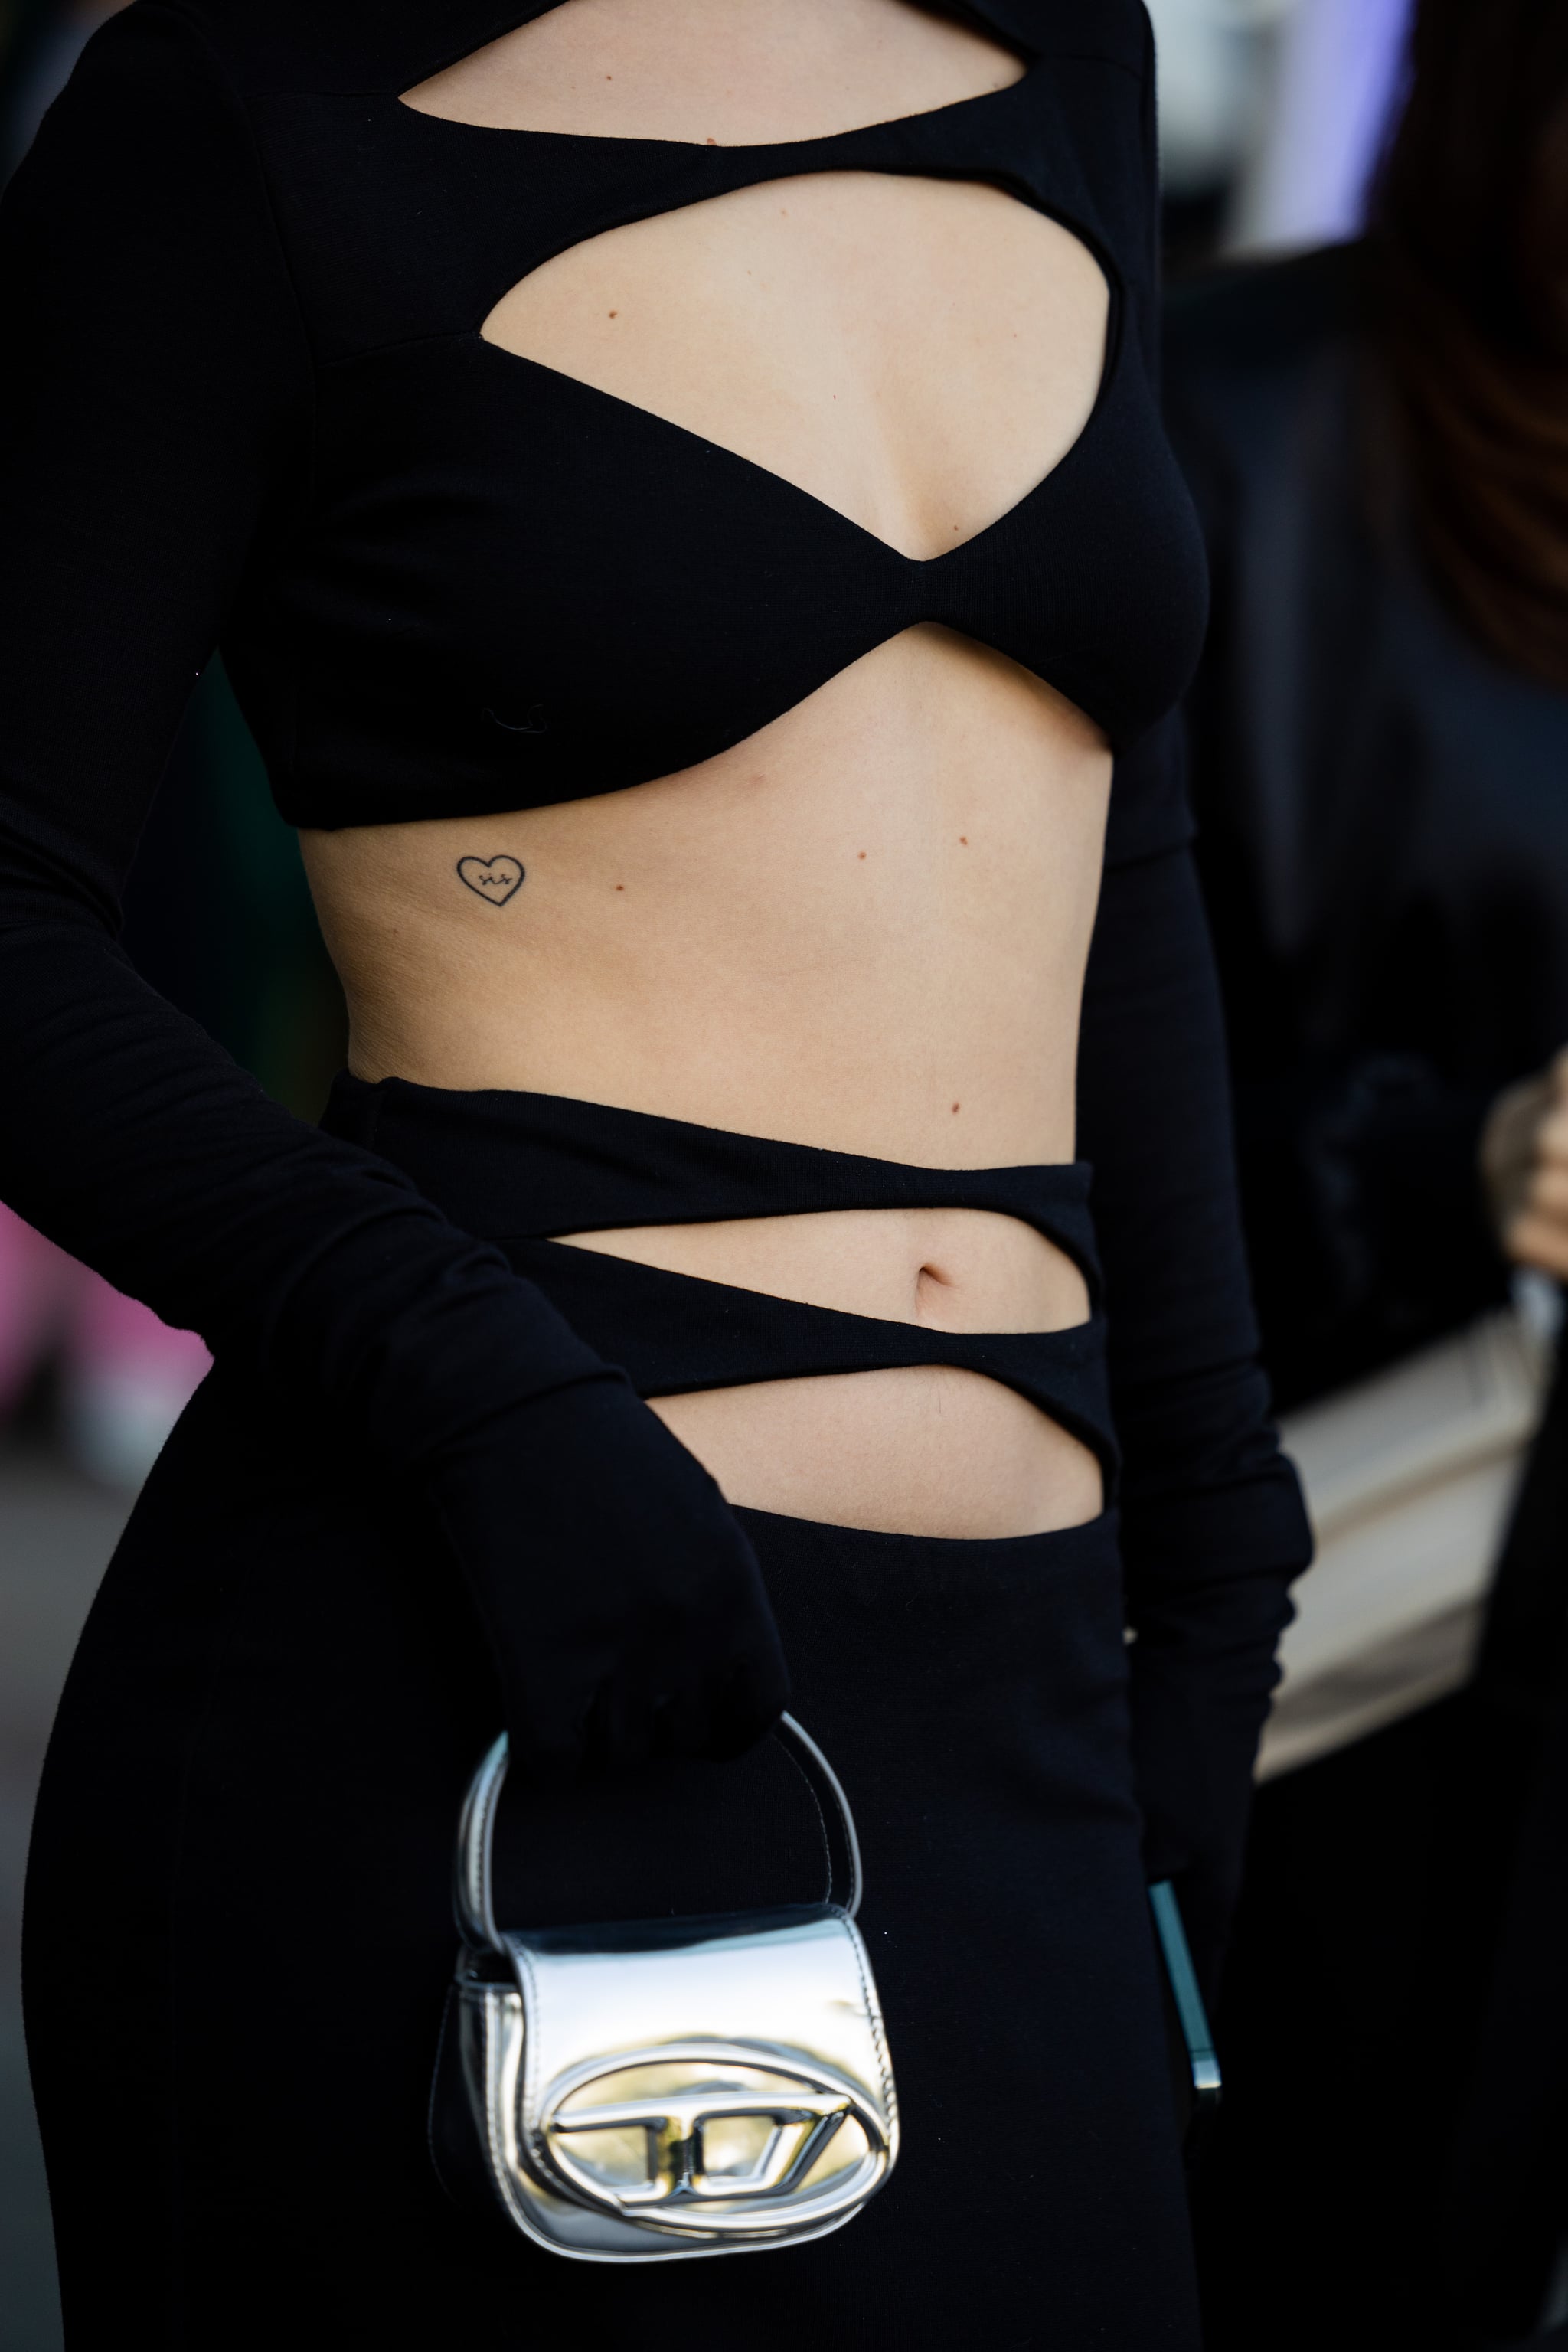 ALMATY, KAZAKHSTAN - MAY 04: A guest with heart tattoo wears black cut out dress, silver Diesel bag, gloves at VISA Fashion Week Almaty Season VII (Autumn/Winter 2024) on May 04, 2023 in Almaty, Kazakhstan. (Photo by Christian Vierig/Getty Images)